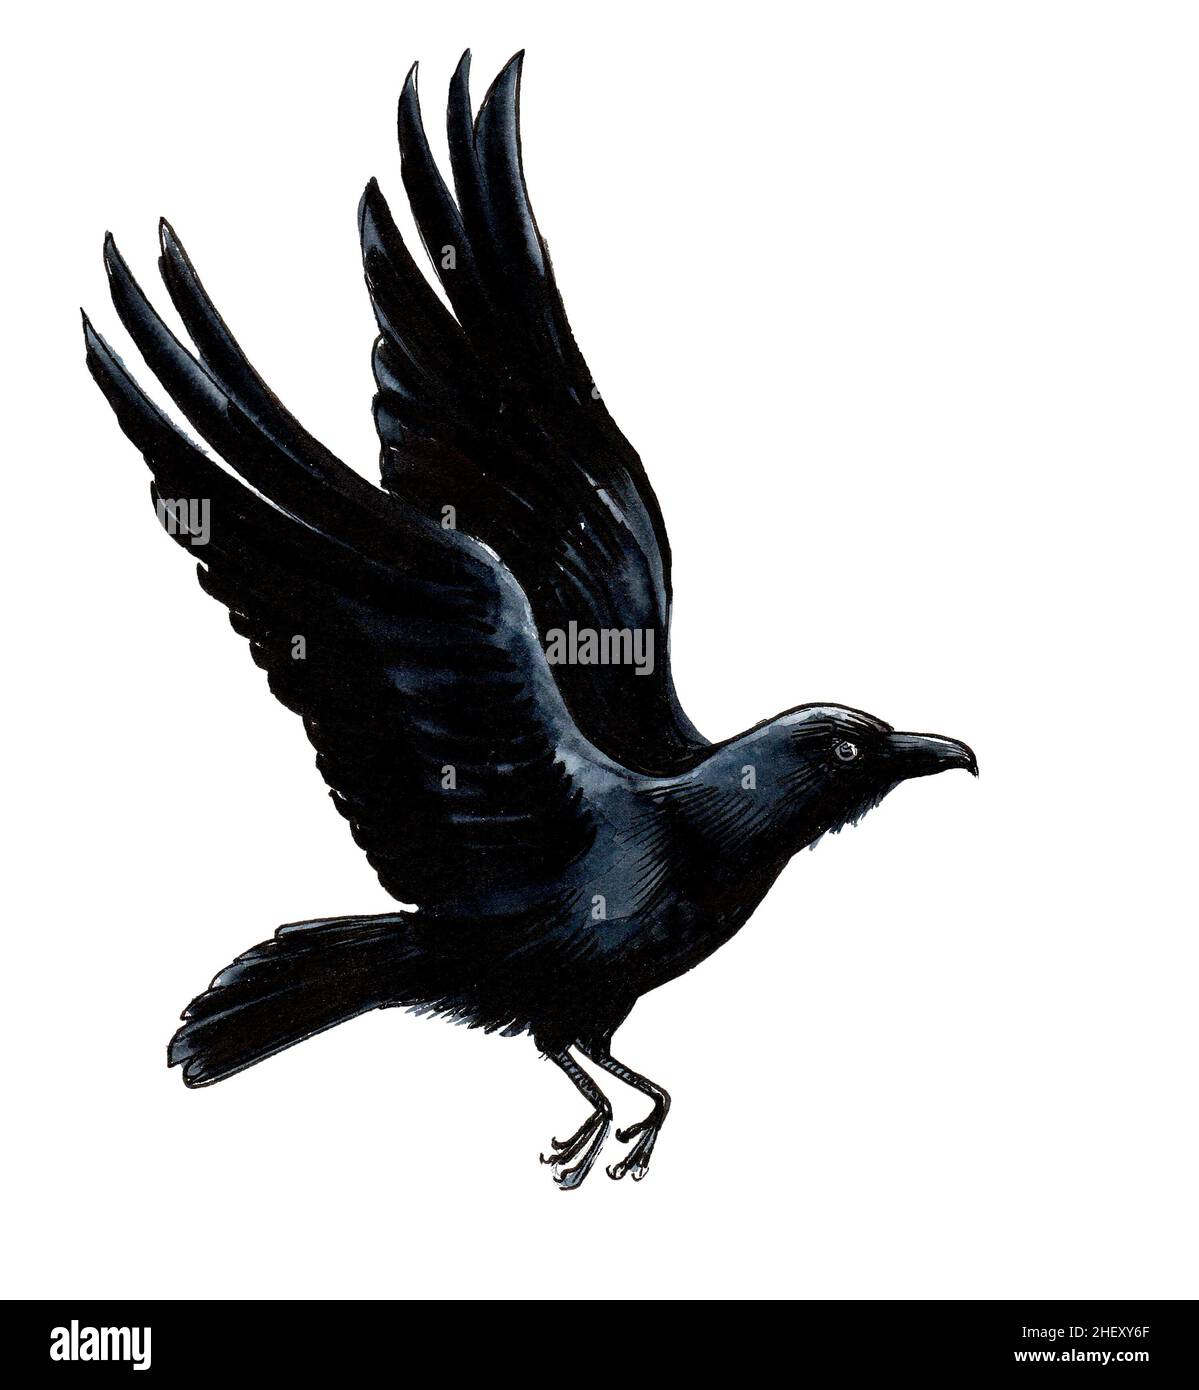 3675 Flying Crow Drawing Images Stock Photos  Vectors  Shutterstock